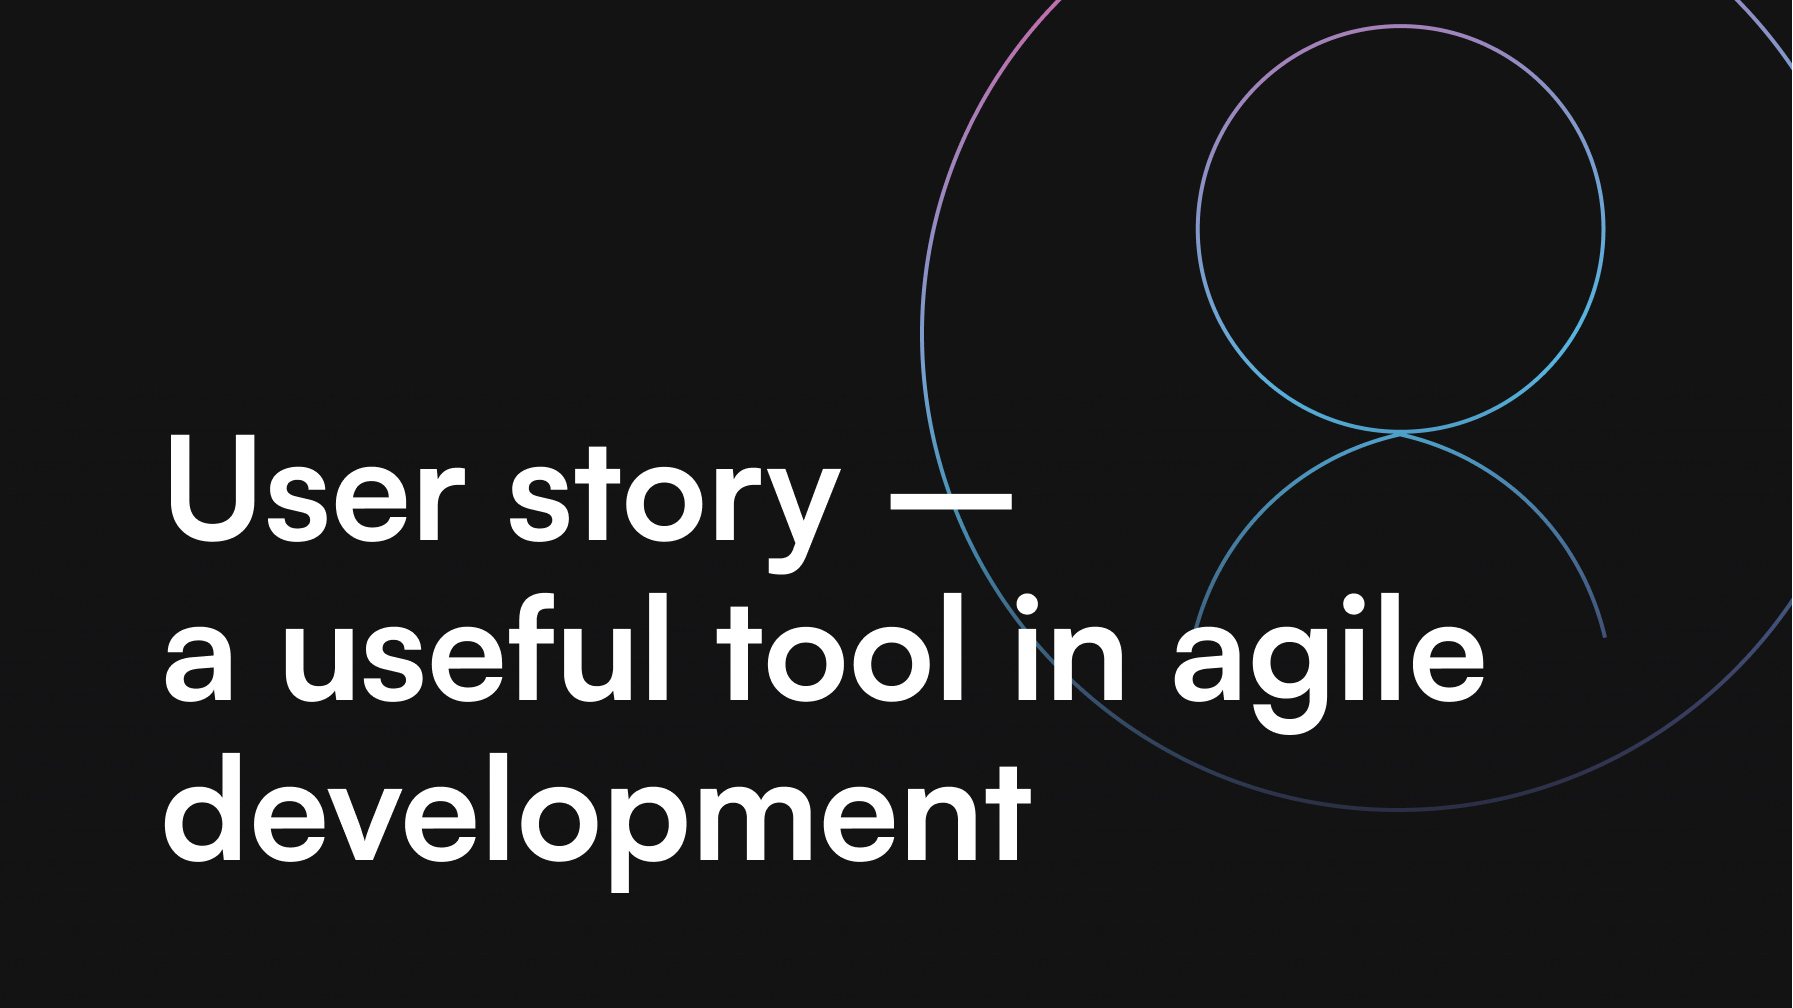 User story - a useful tool in agile development